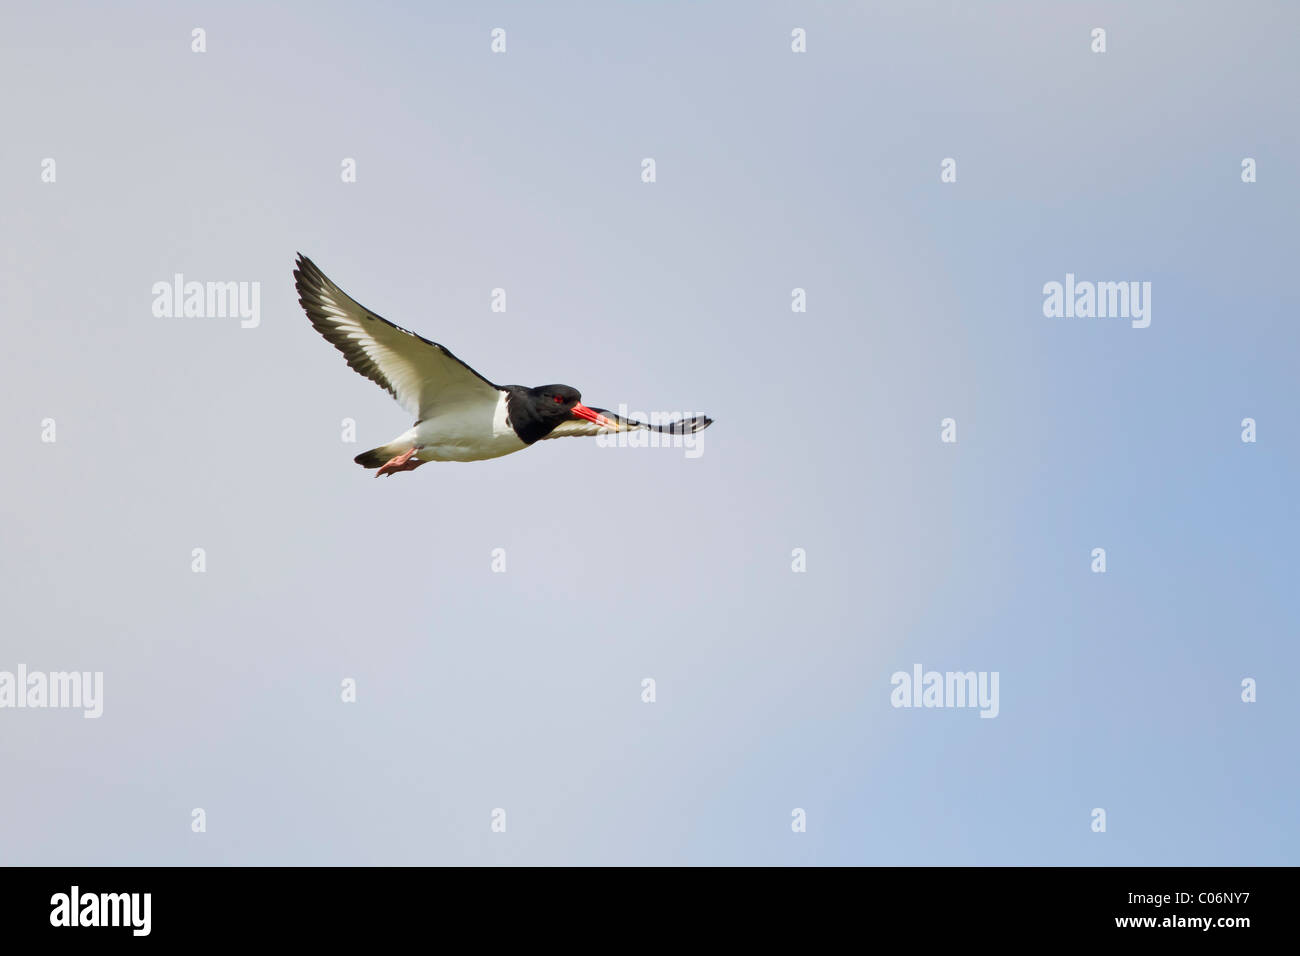 Oystercatcher in flight against a blue sky Stock Photo